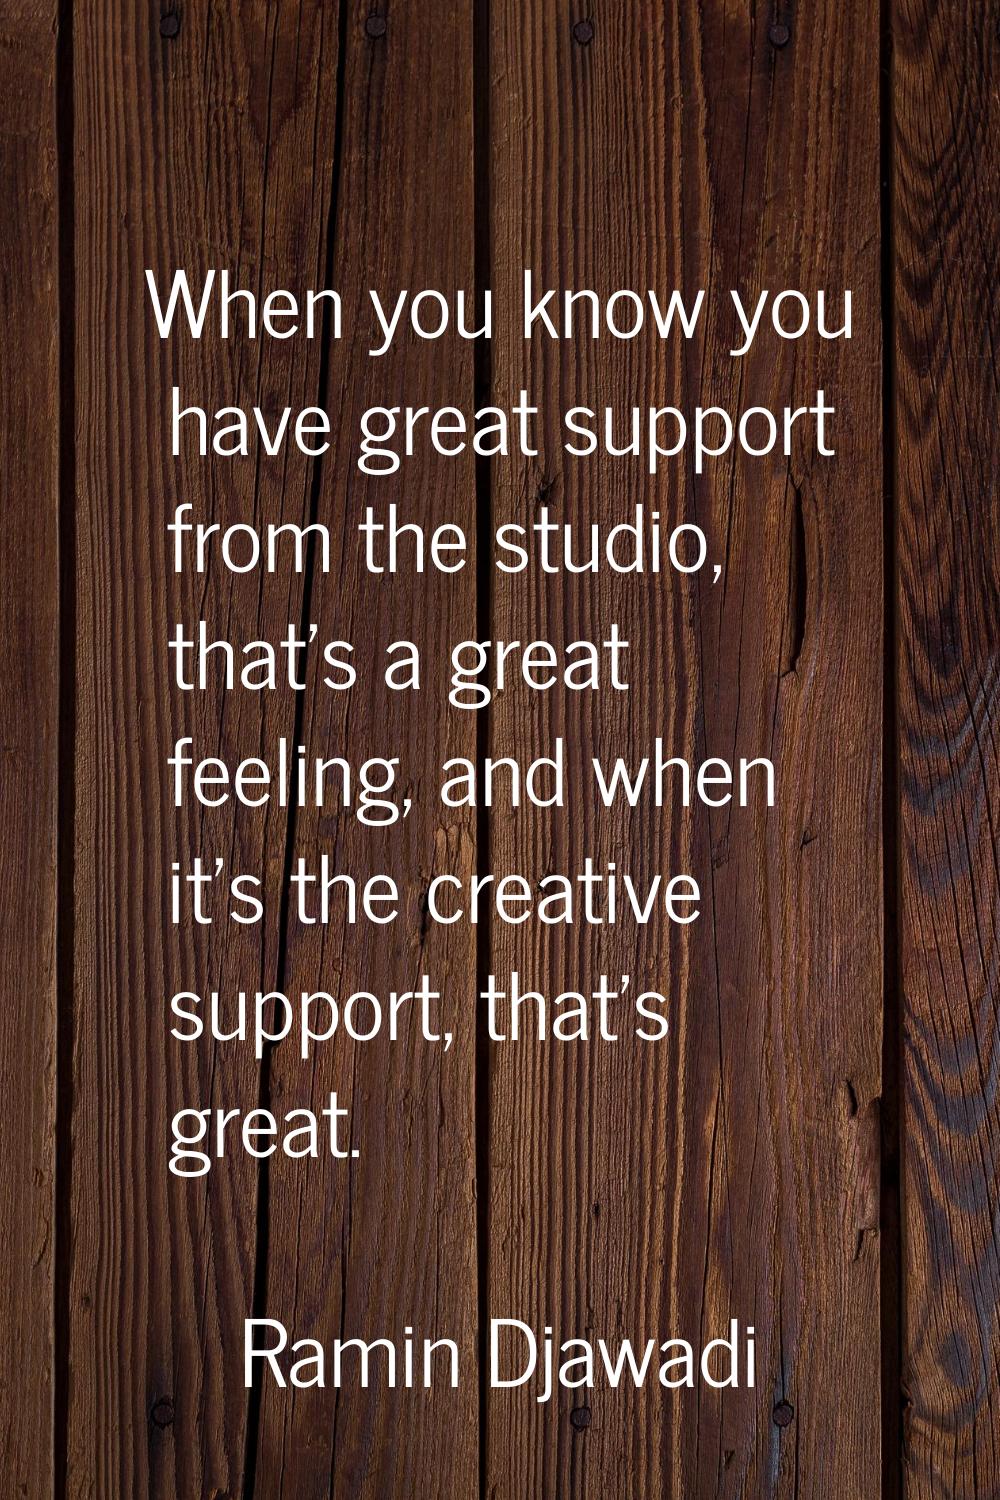 When you know you have great support from the studio, that's a great feeling, and when it's the cre